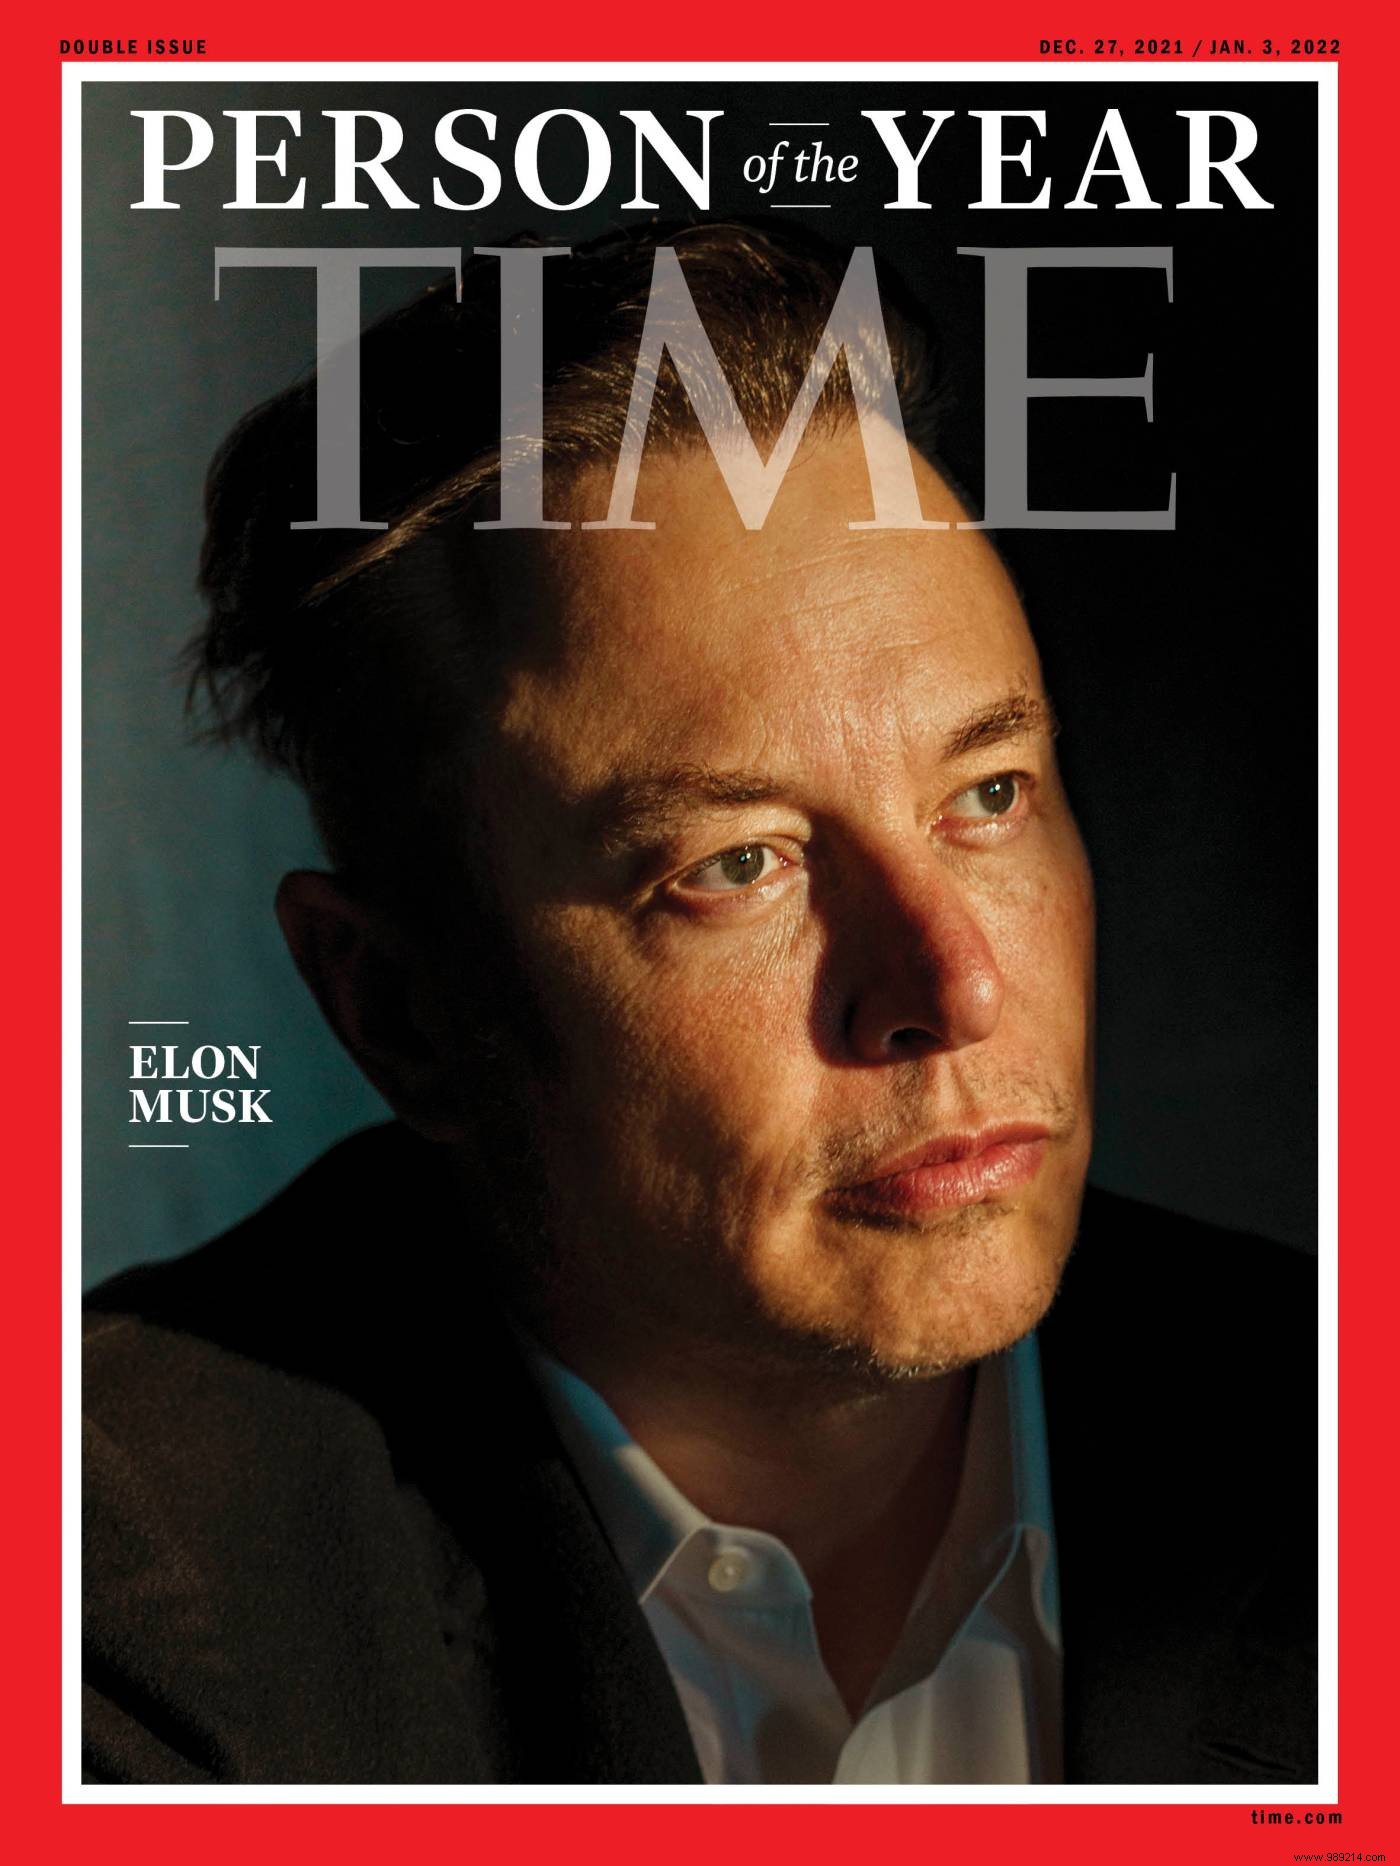 Why Time named Elon Musk Person of the Year 